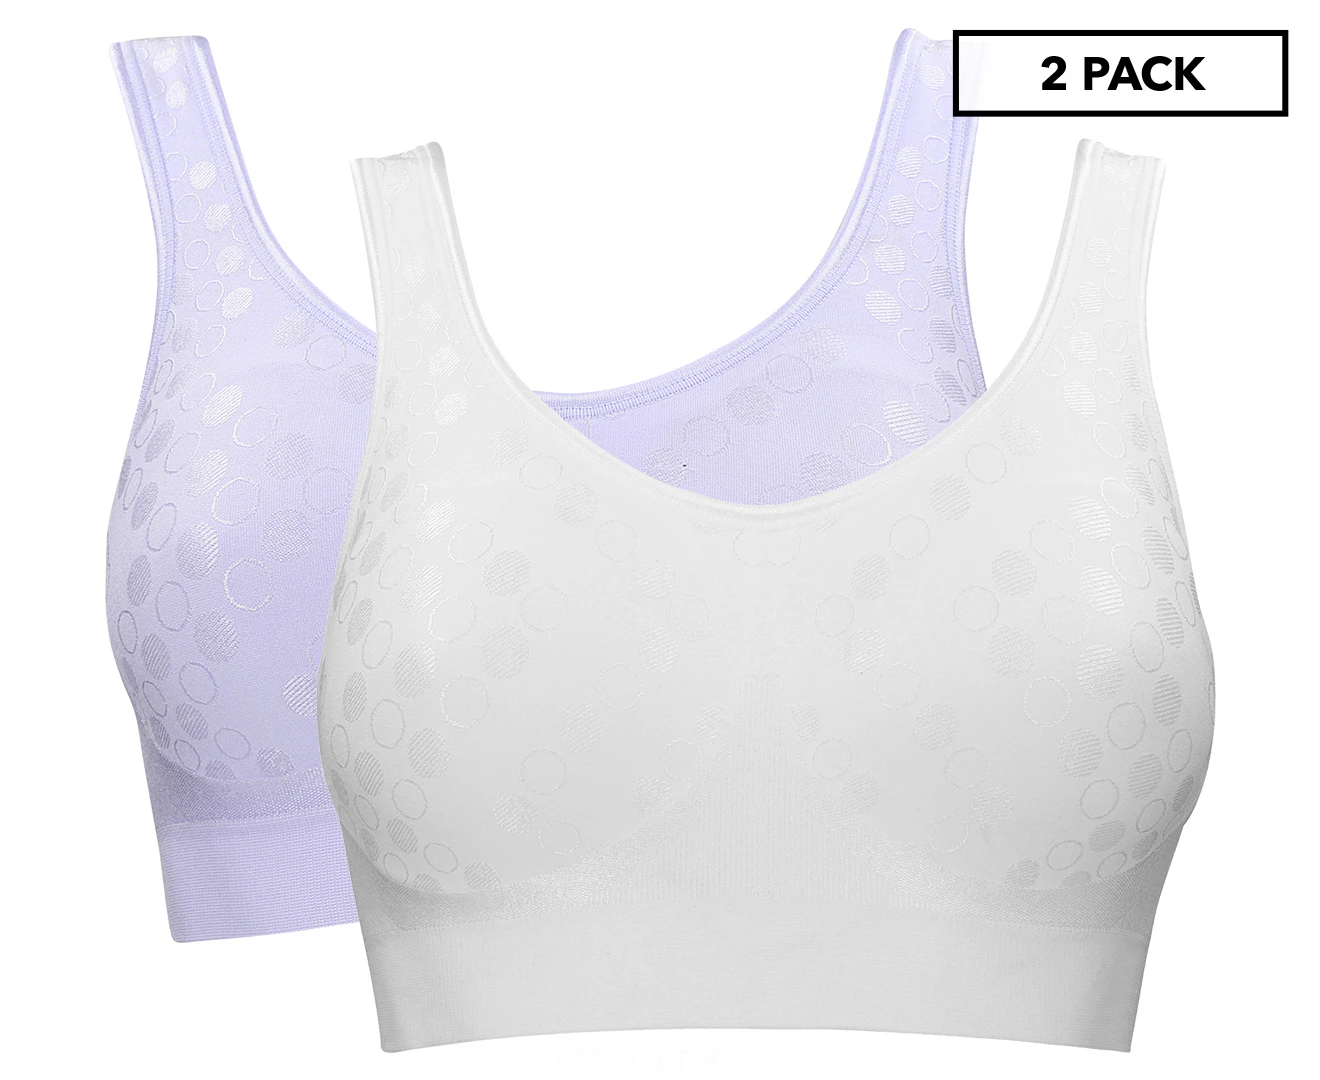 Buy cheap Playtex lingerie and shapewear online!